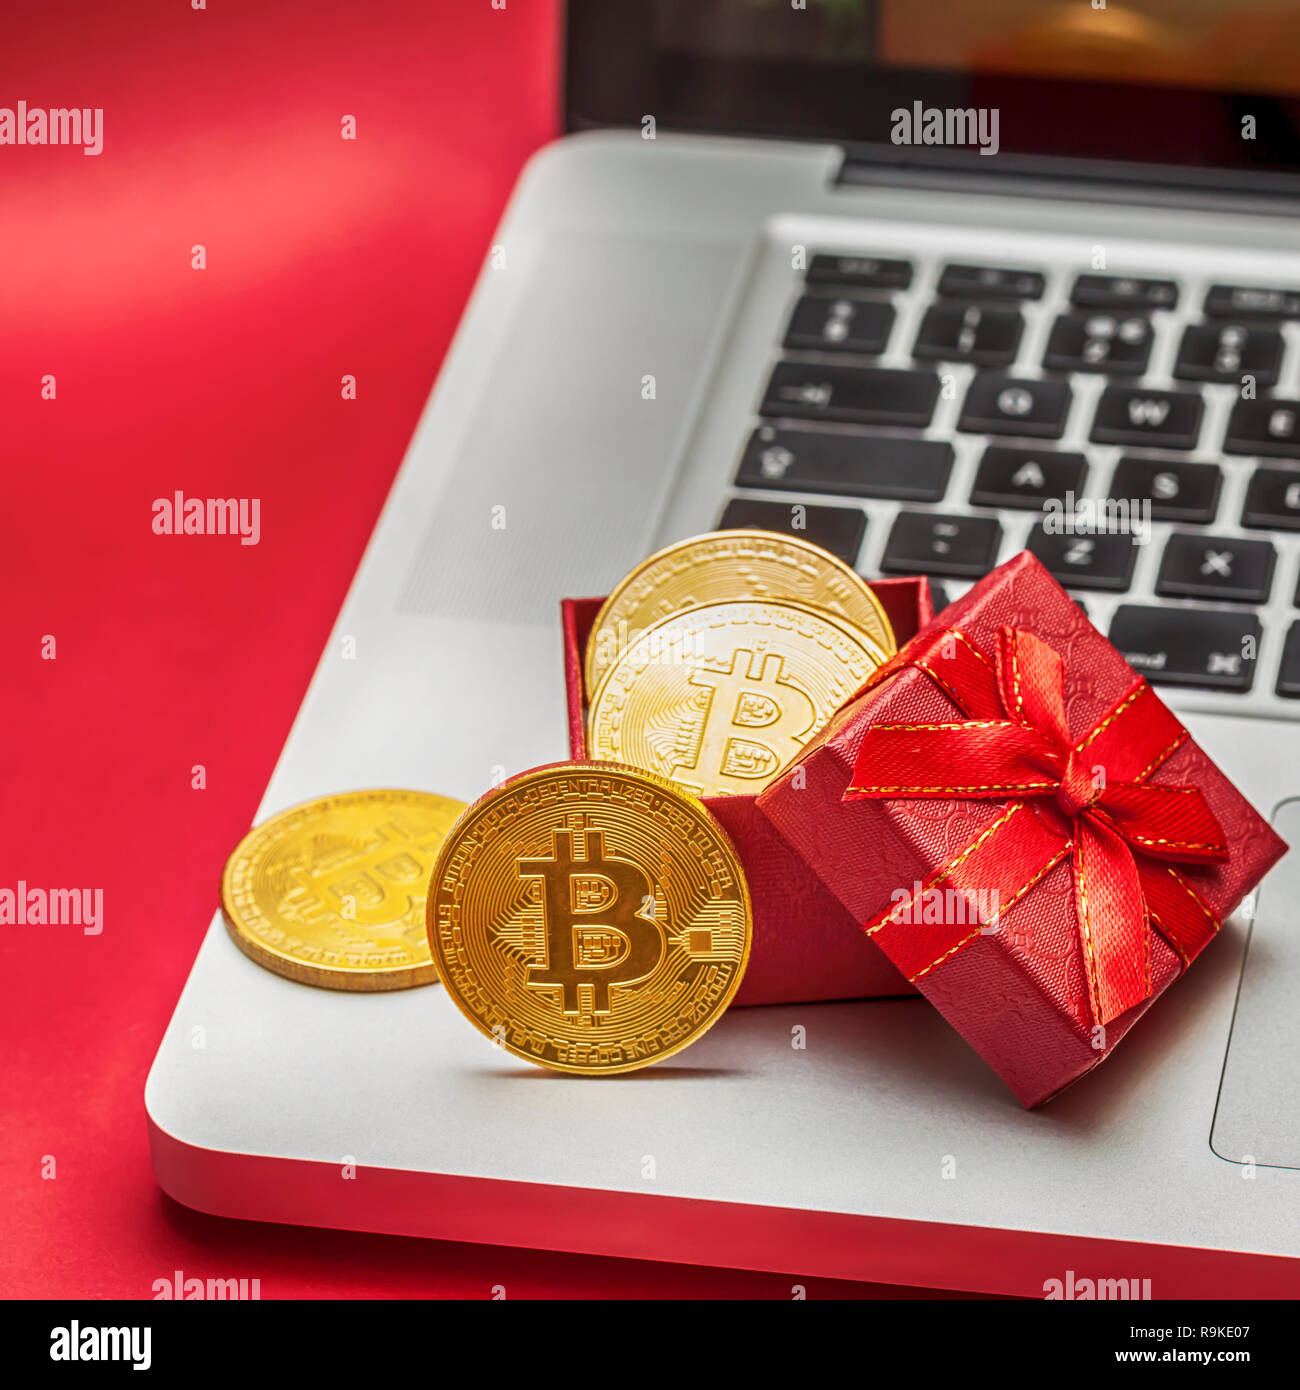 Belgrade, Serbia - Dec 16, 2018 - Bitcoin gift for new year on the laptop - Christmas Cryptocurrency celebration concept. Stock Photo